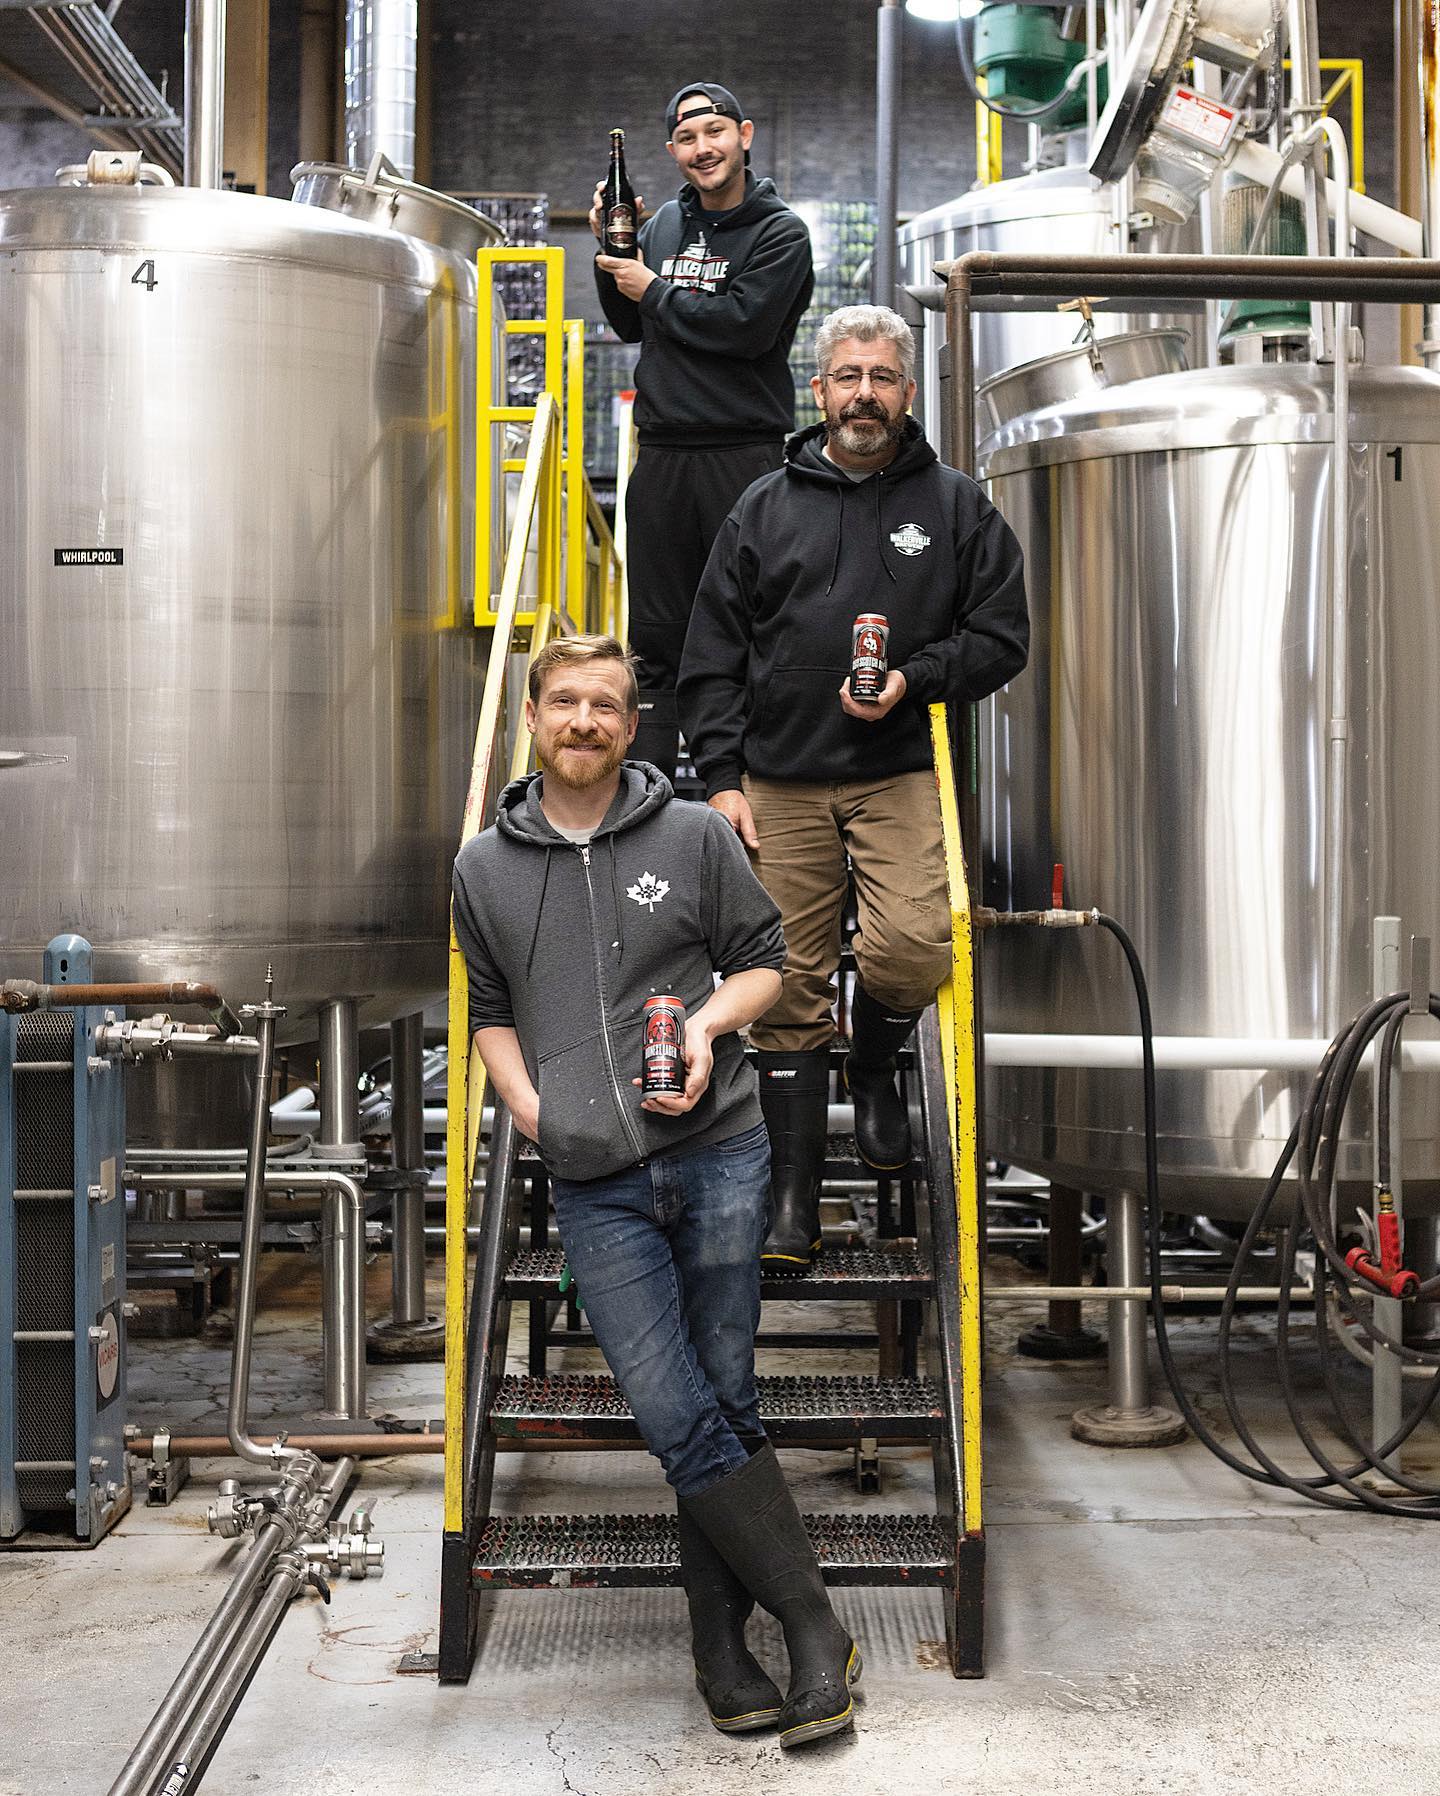 The brewing crew from Walkerville Brewery holding their 2021 Ontario Brewing Awards medal winners.